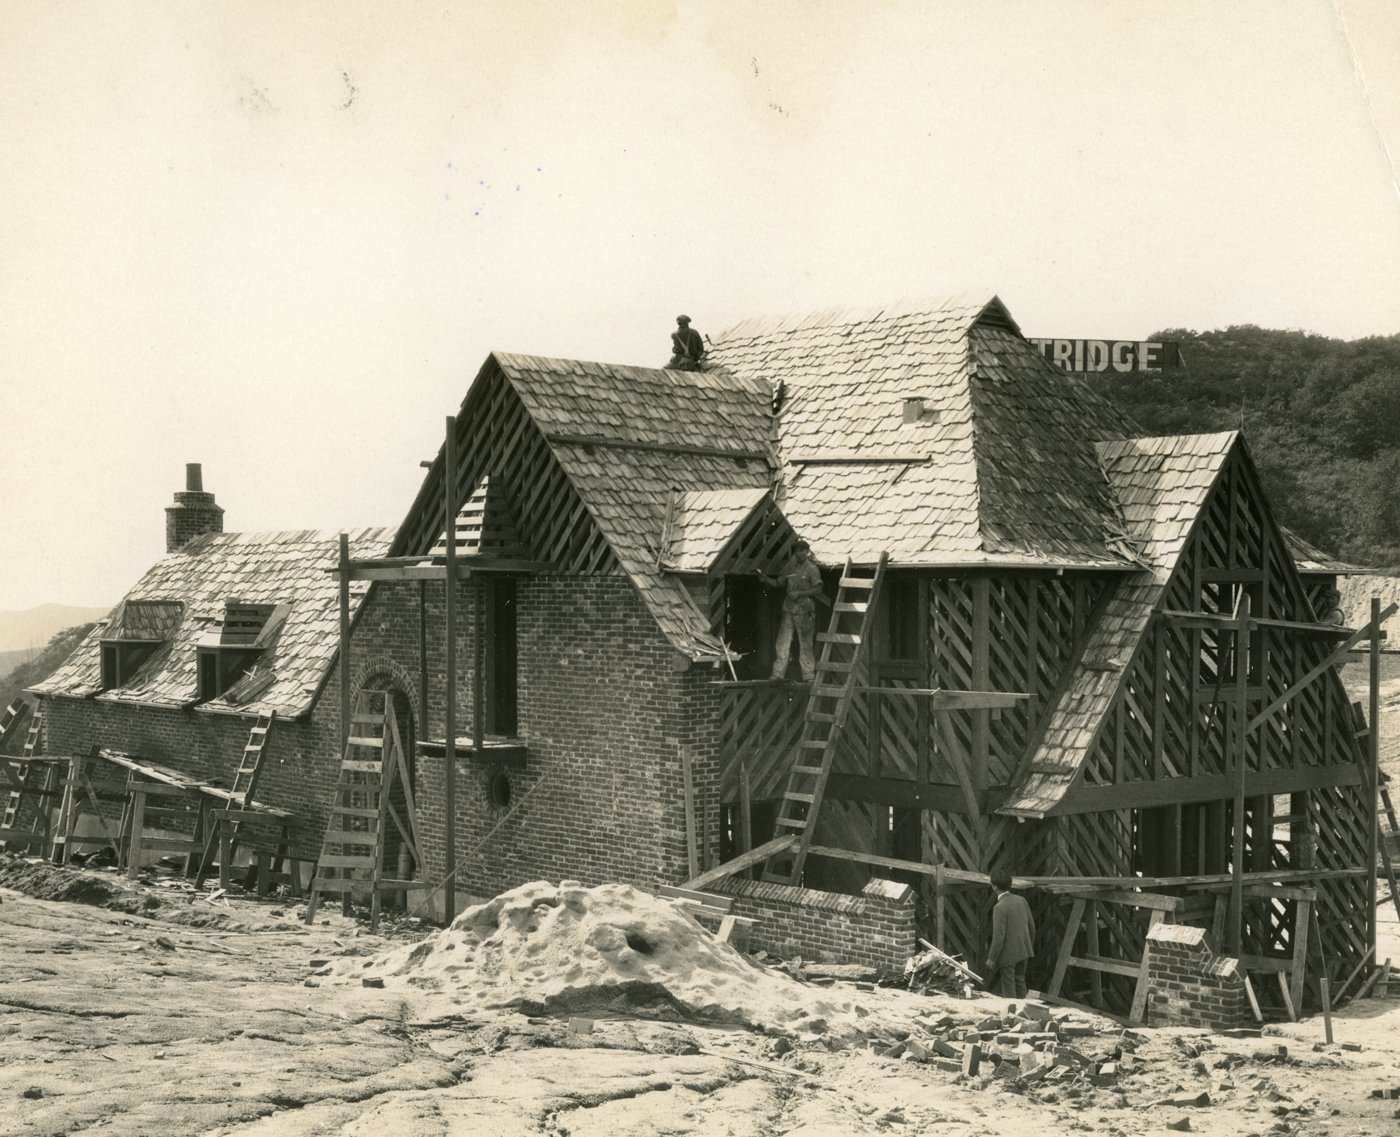 3713 Chevy Chase Drive under construction, c. 1926